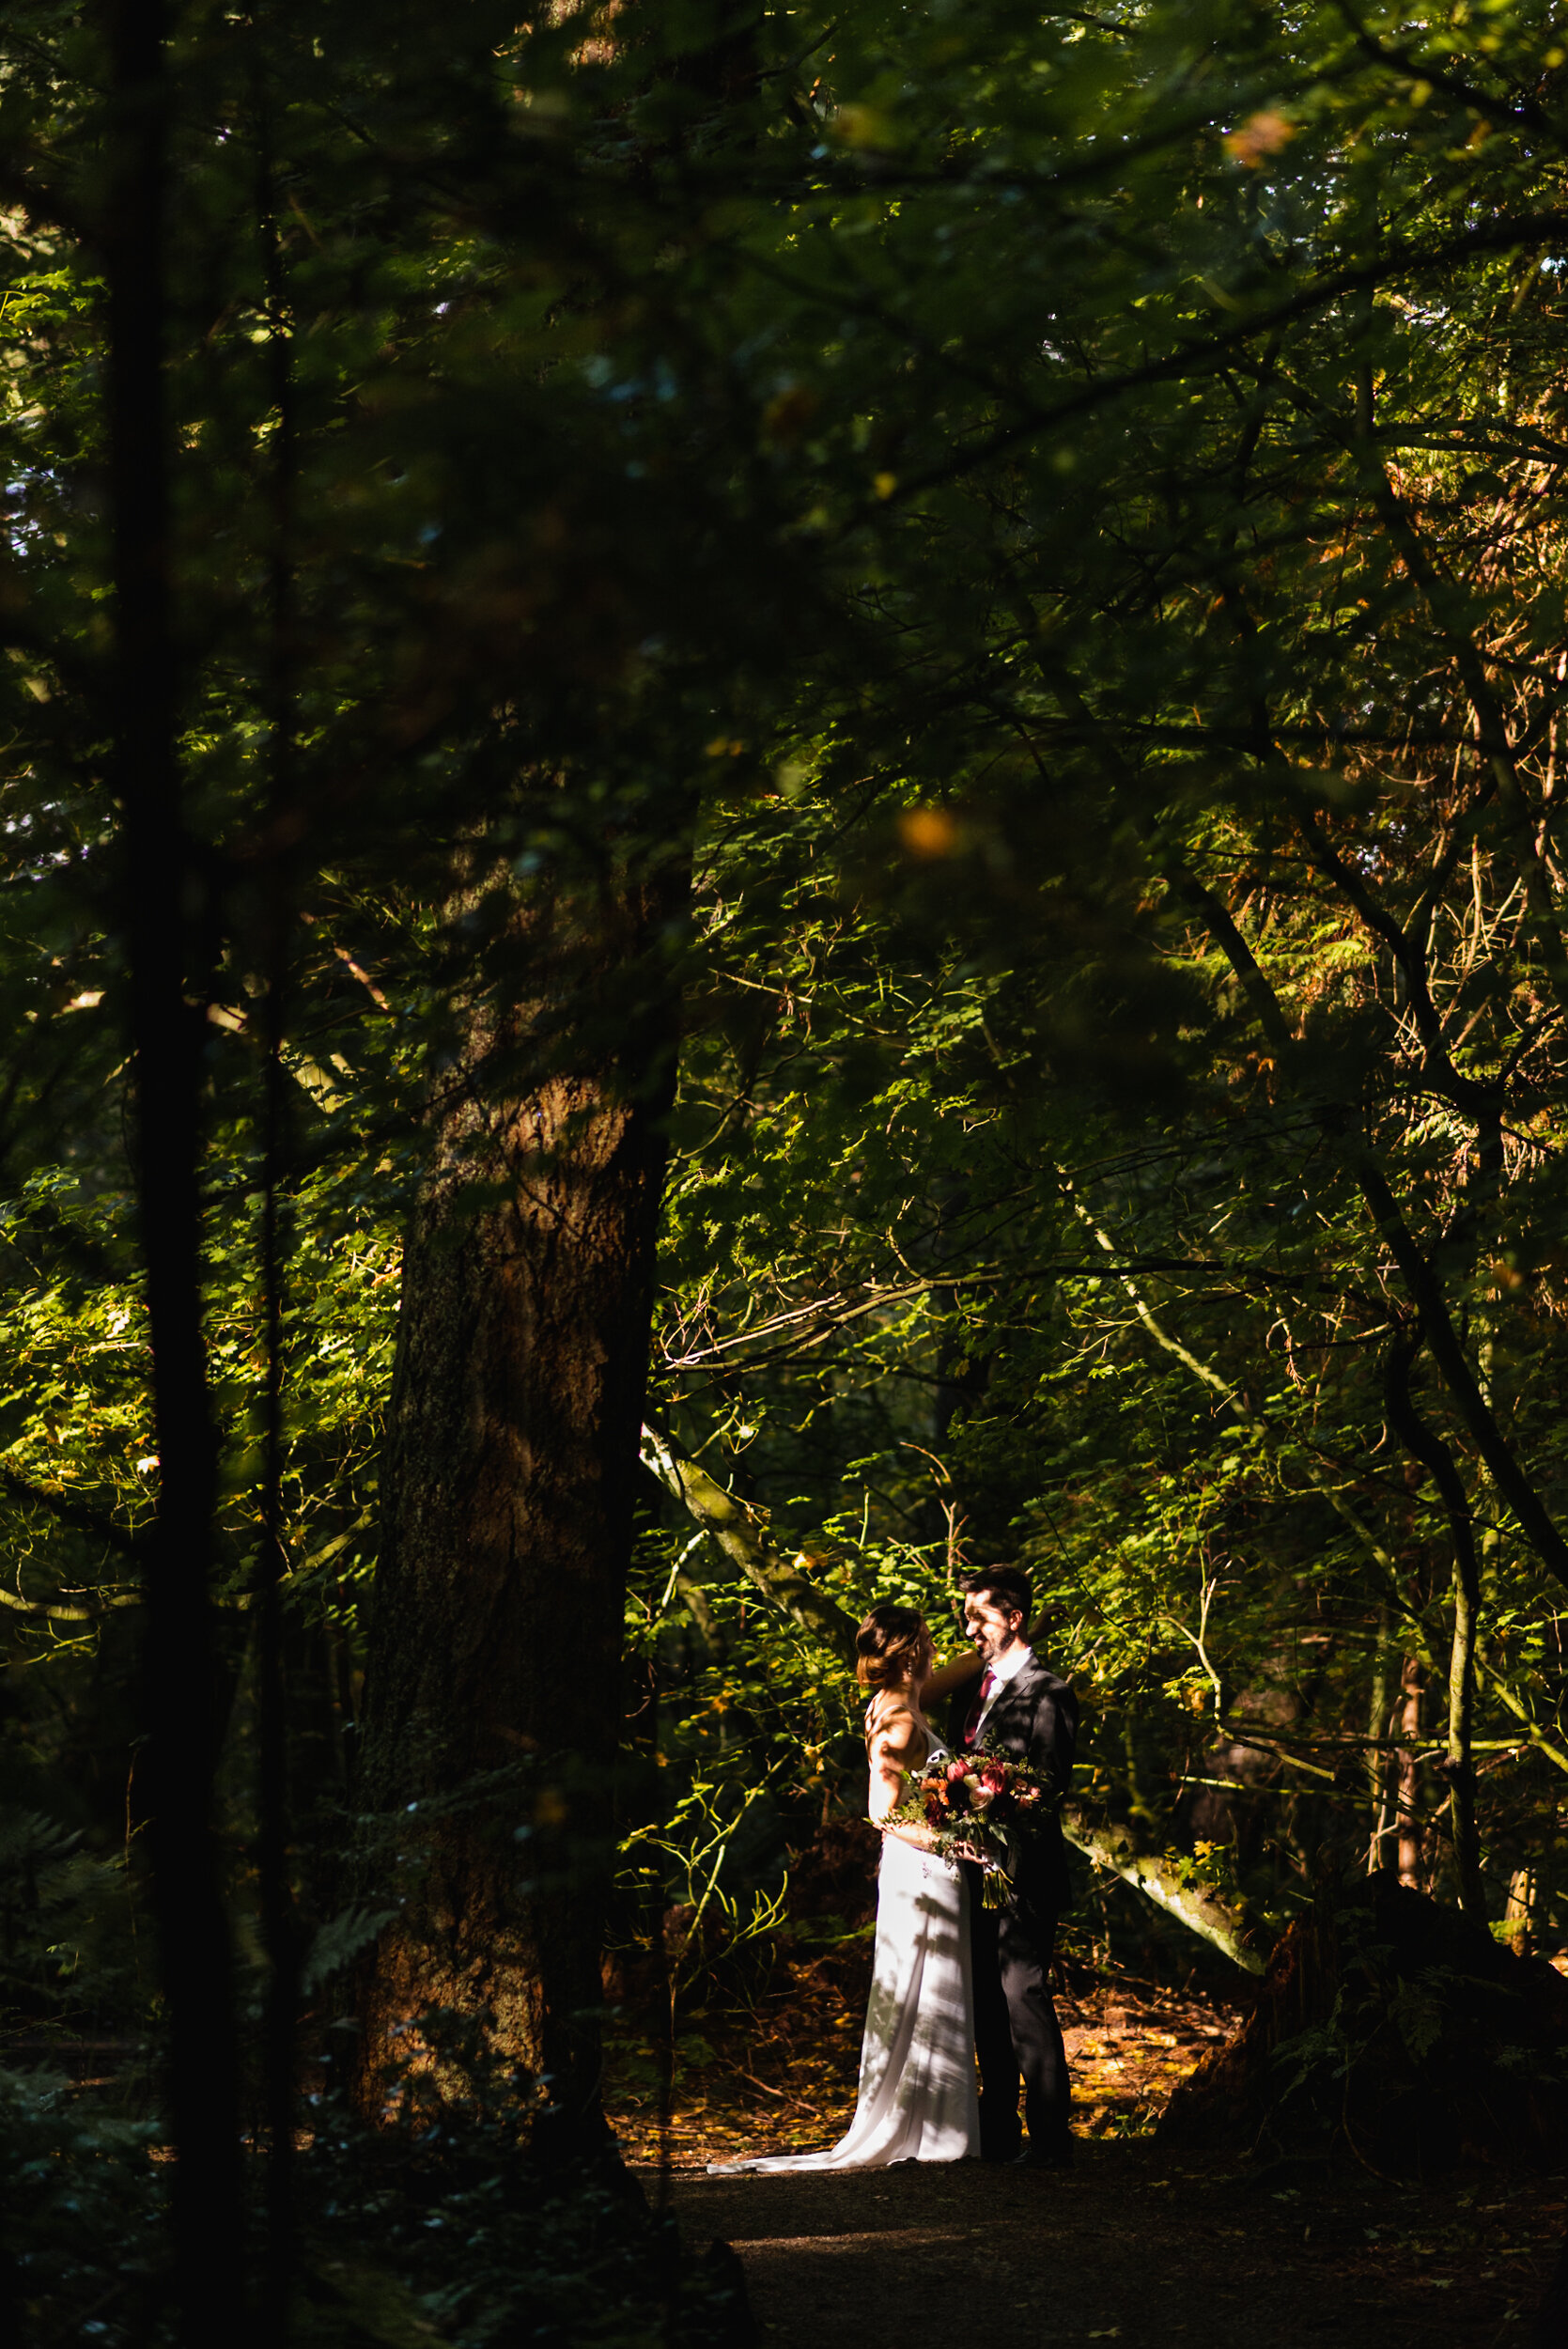 Couple stands in forest dappled light